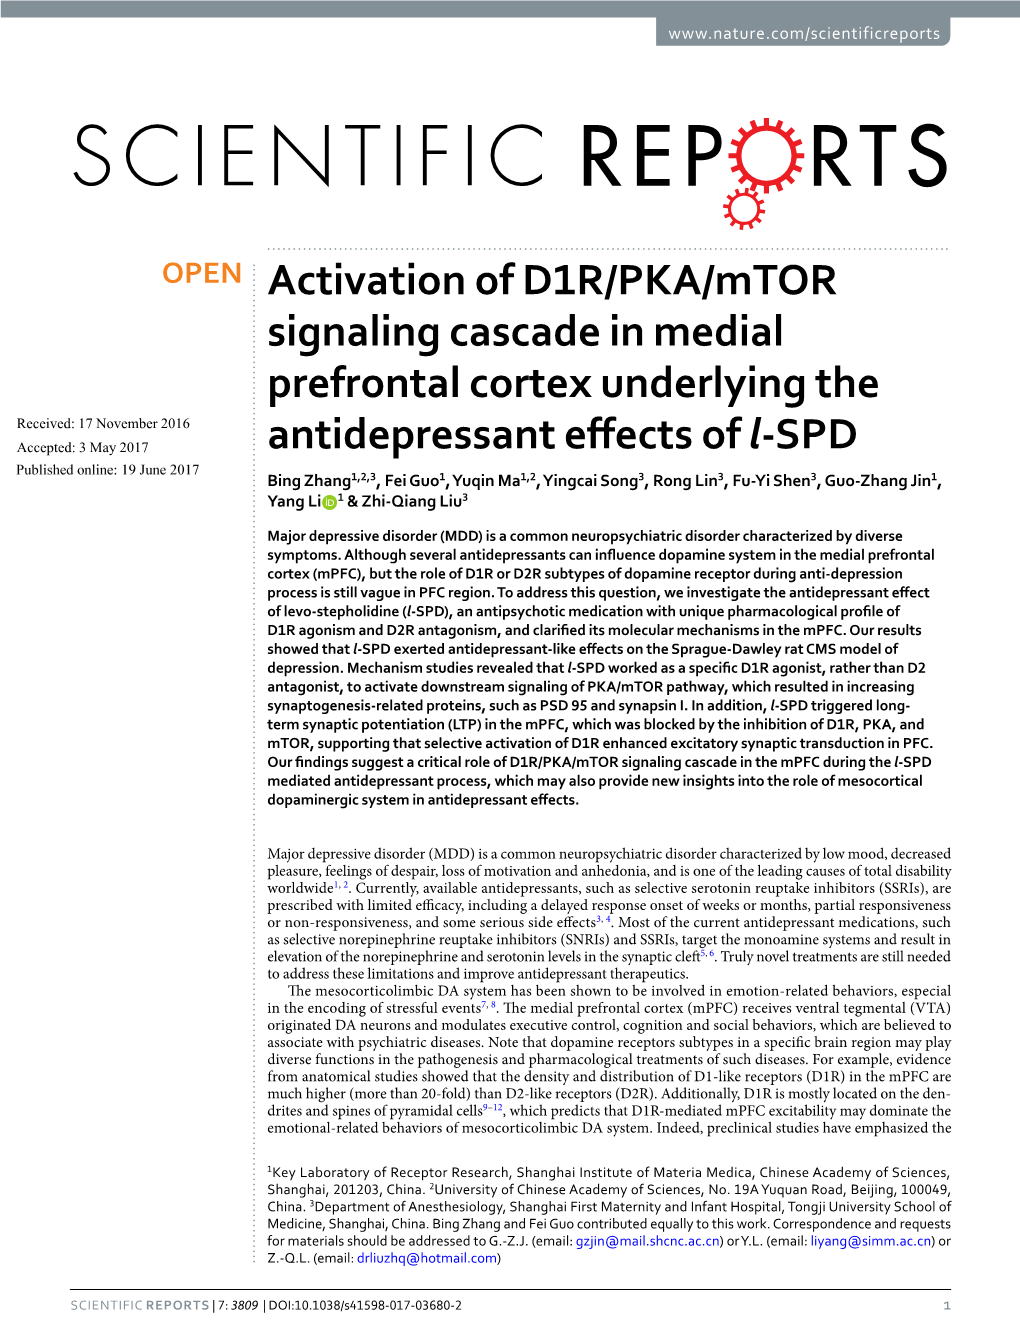 Activation of D1R/PKA/Mtor Signaling Cascade in Medial